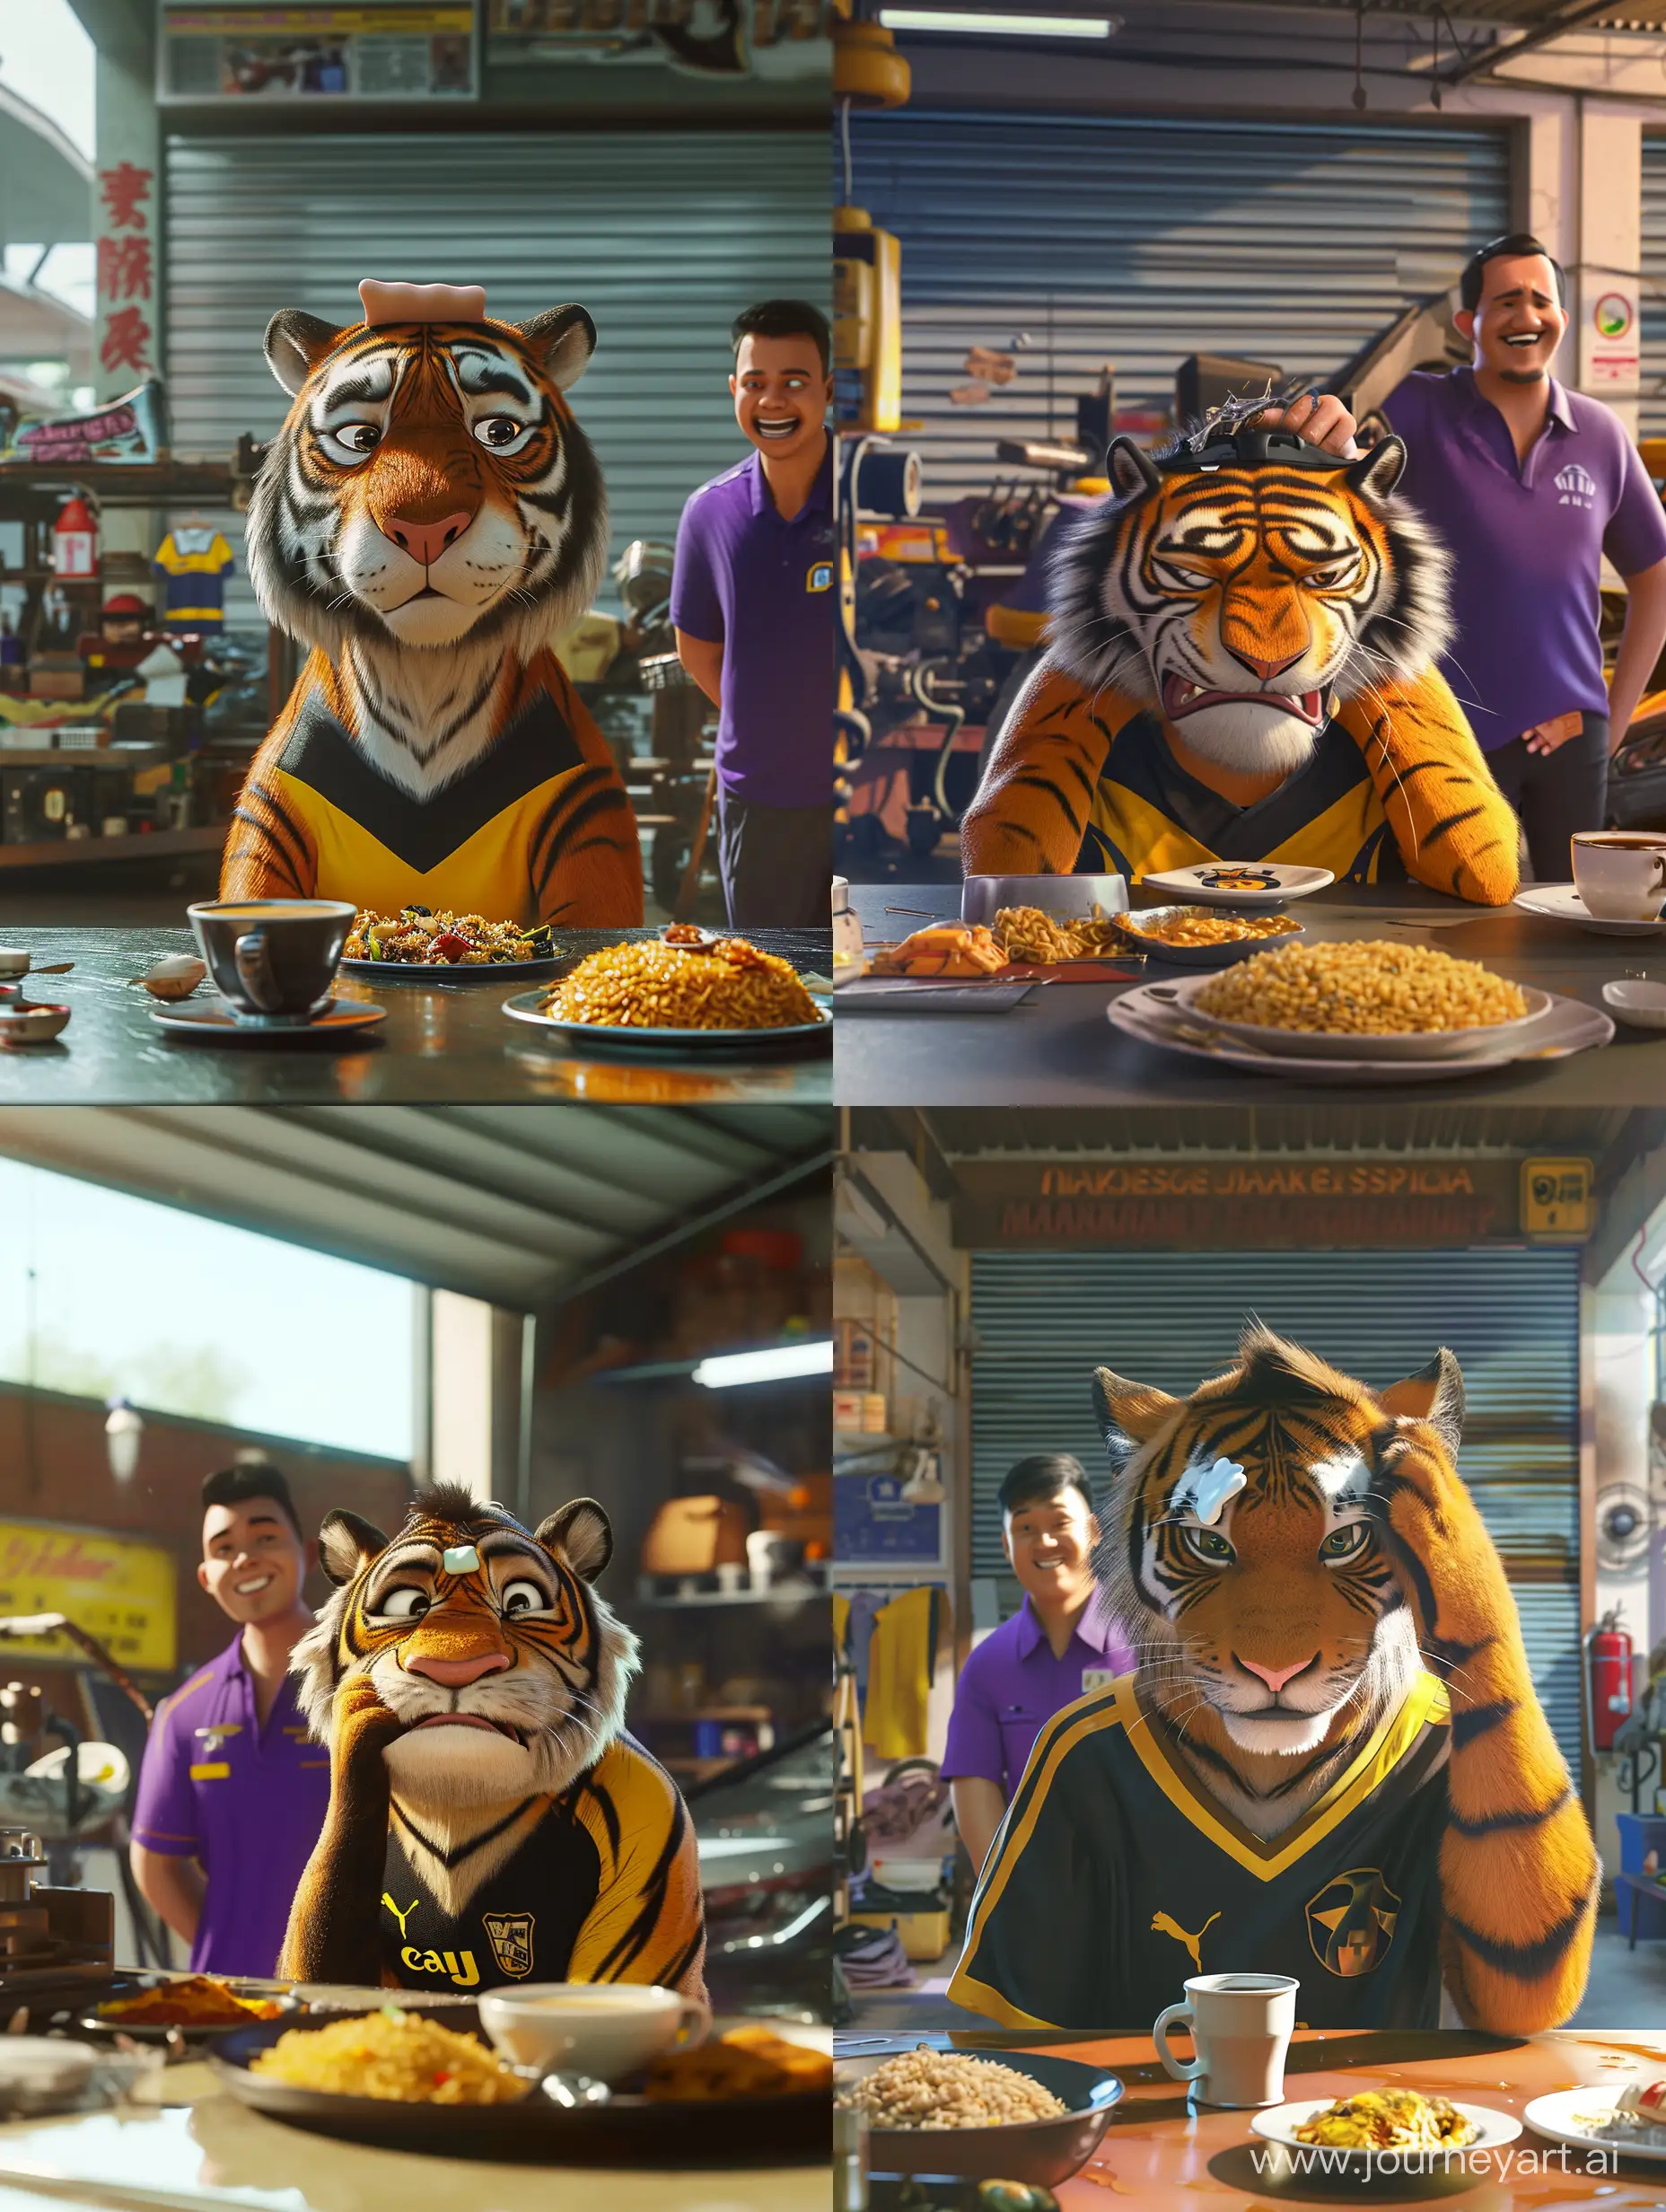 ultra realistic animation cartoon,a tiger is having breakfast. his head was plastered with a headache plaster. there is nasi lemak and coffee on the table. The tiger raised its chin with a sad face. The tiger wears a black and yellow Malaysian football jersey. the background of a closed modern car workshop. behind there is a malay mechanic wearing a purple shirt and smiling. there is refraction of morning sunlight. canon eos-id x mark iii dslr --v 6.0